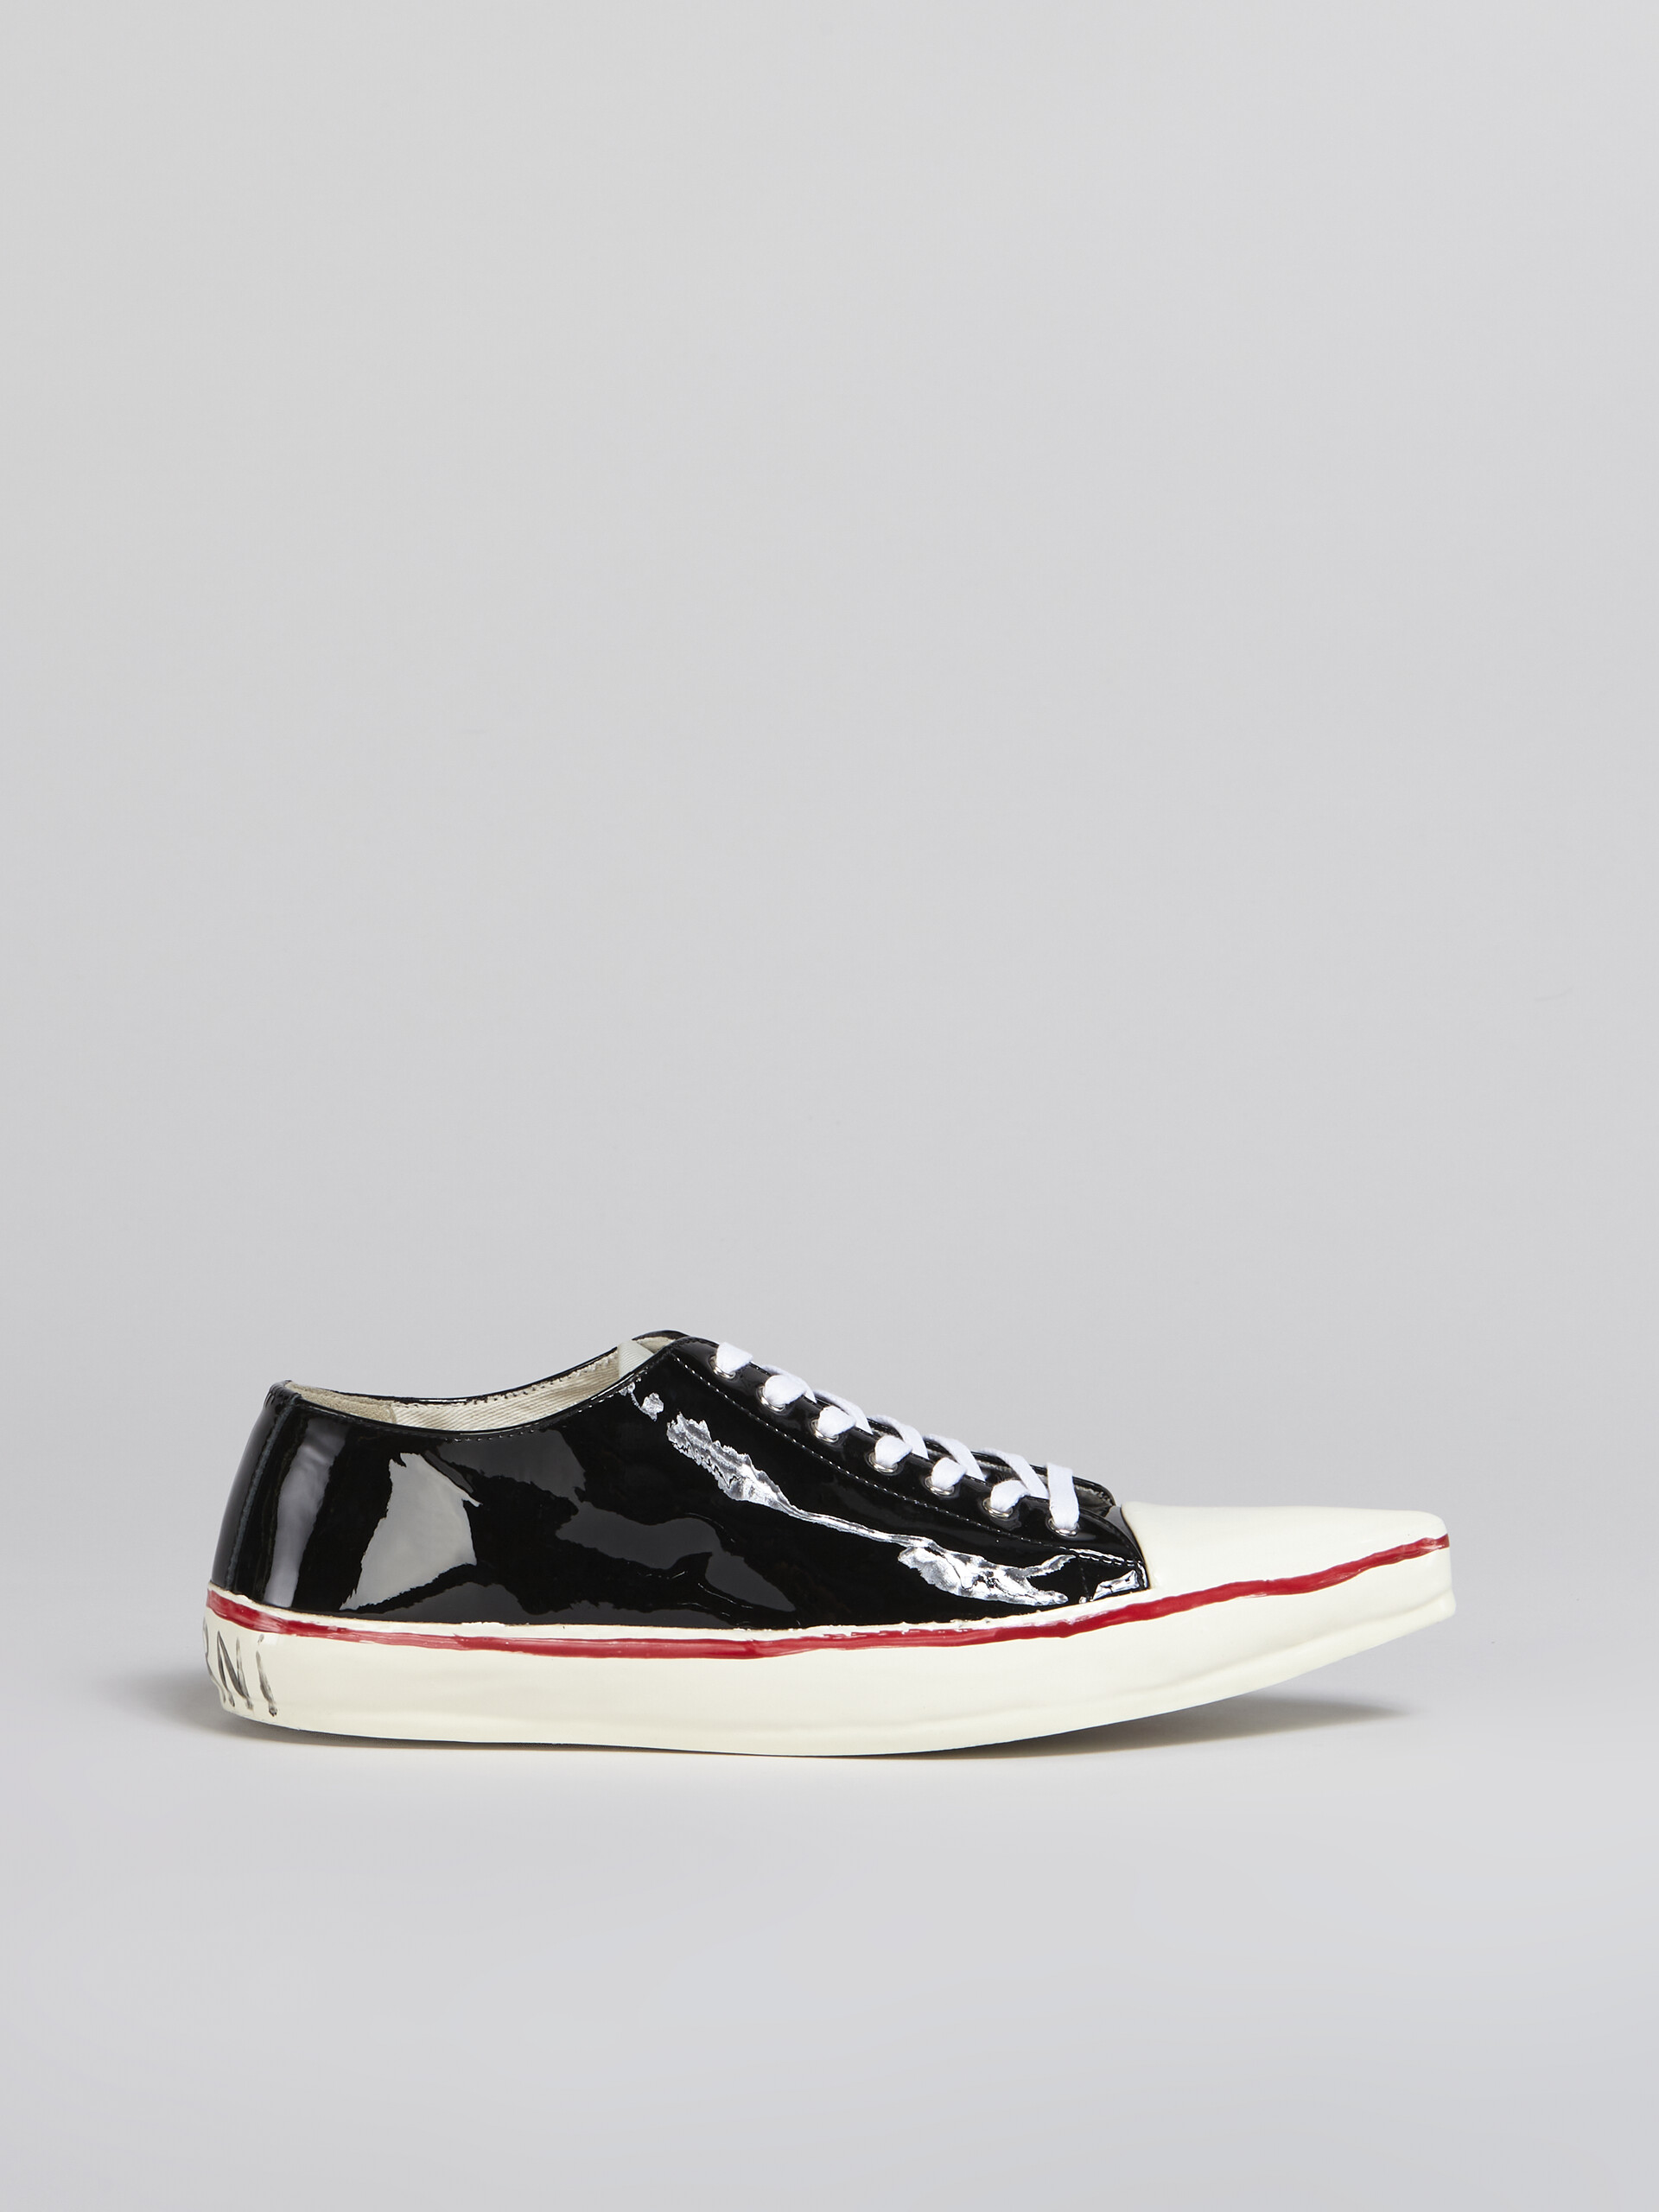 Patent leather GOOEY low-top sneaker w/Marni graffiti-style signature - Sneakers - Image 1